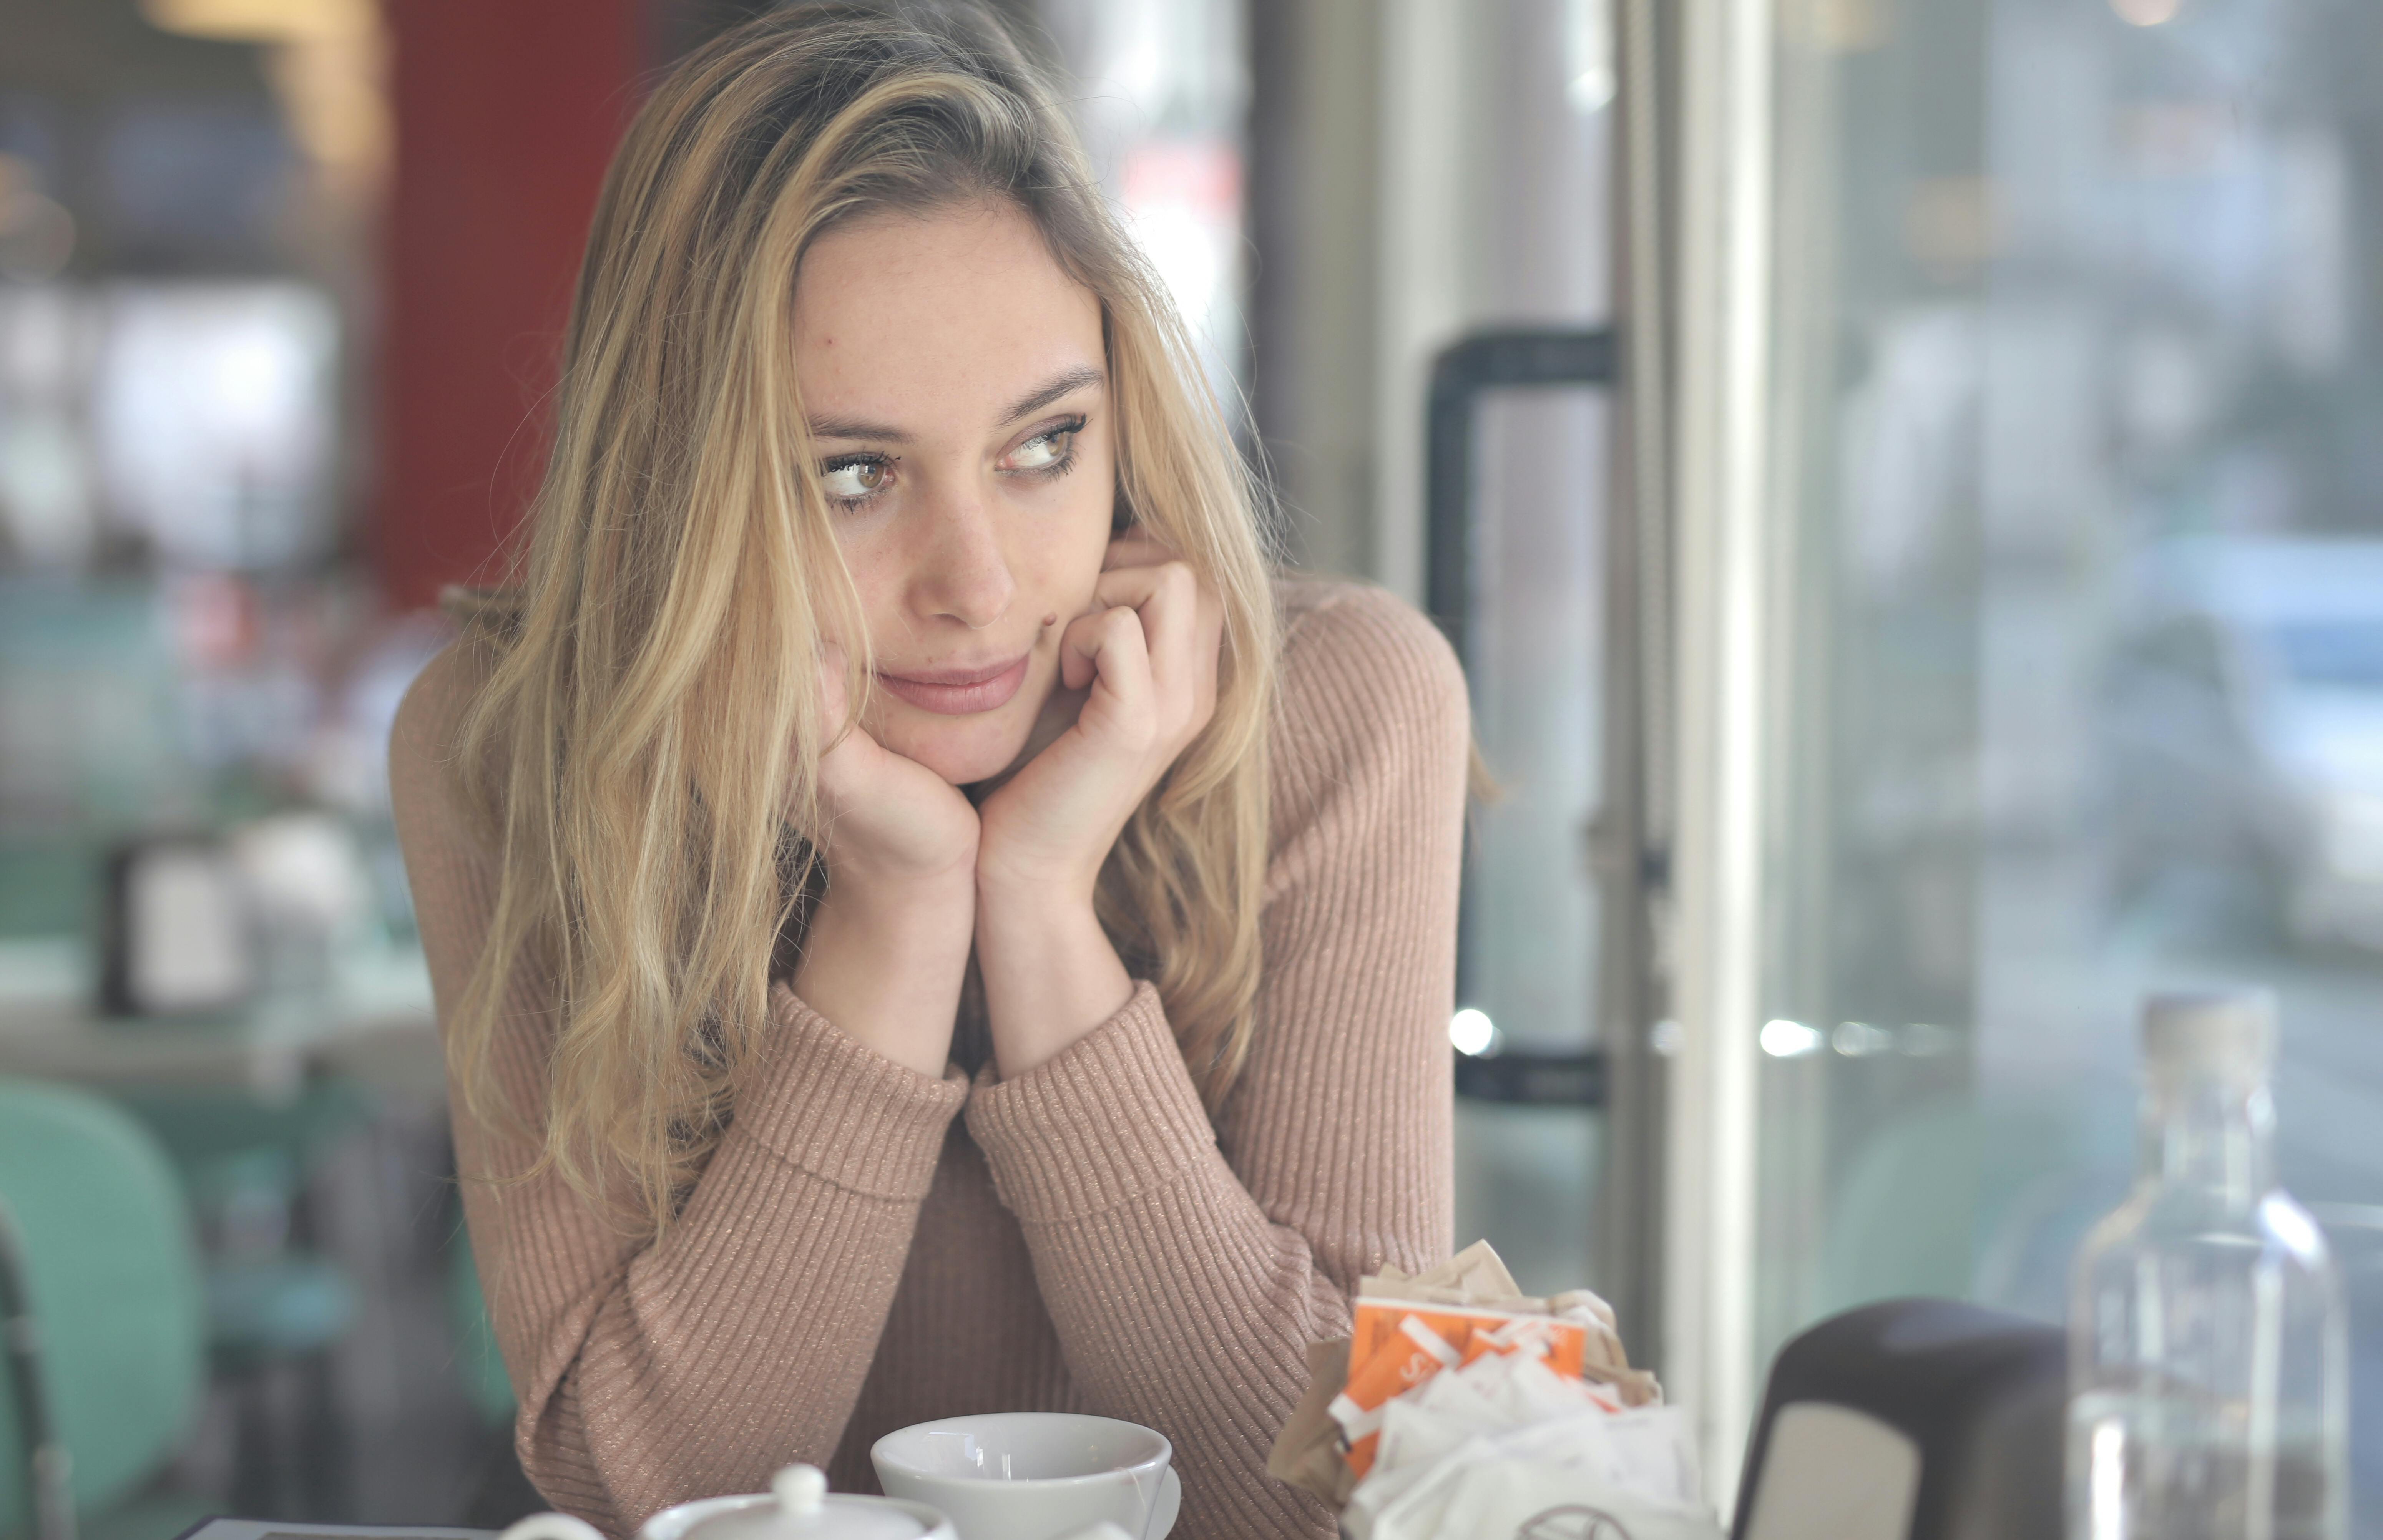 Woman in brown sweater sits at the table | Source: Pexels